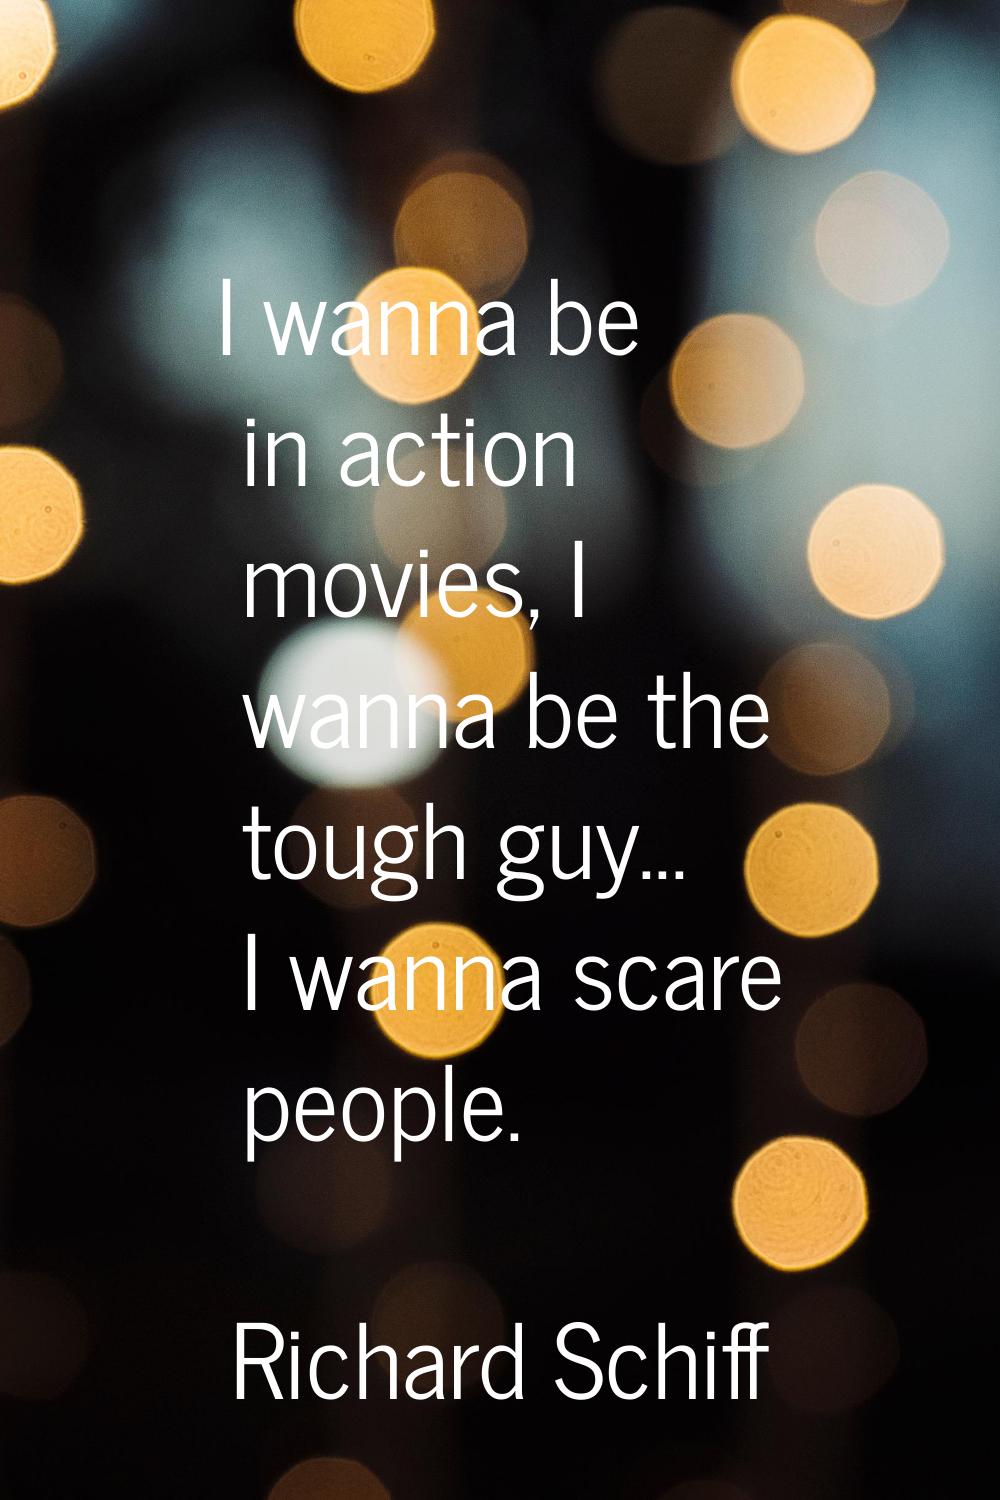 I wanna be in action movies, I wanna be the tough guy... I wanna scare people.